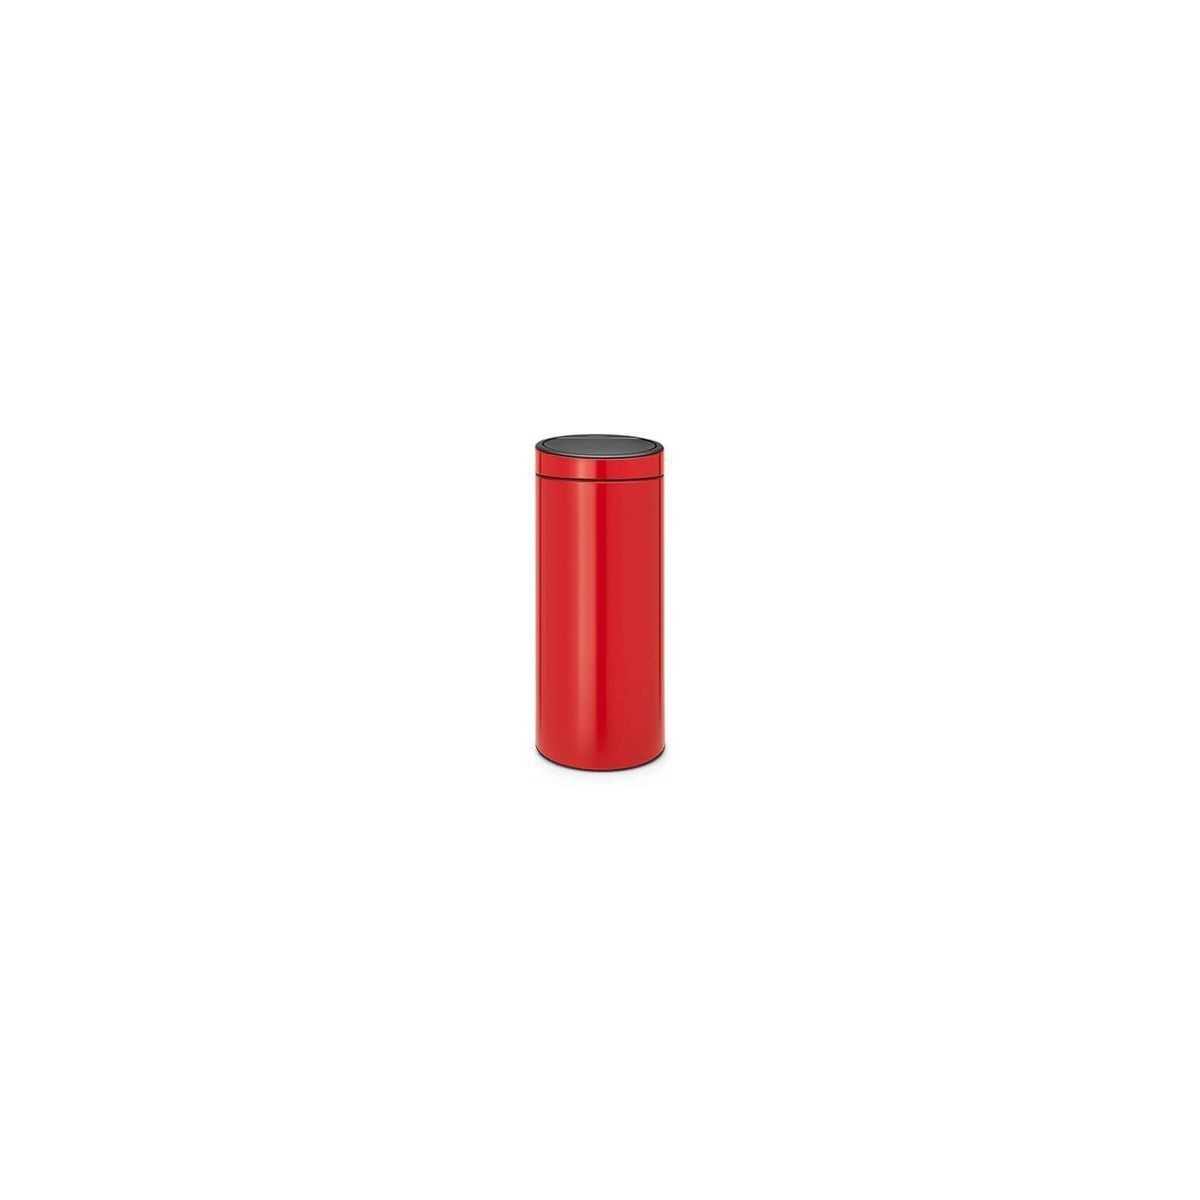 BRABANTIA POUBELLE 30L TOUCH BIN "NEW" PASSION RED